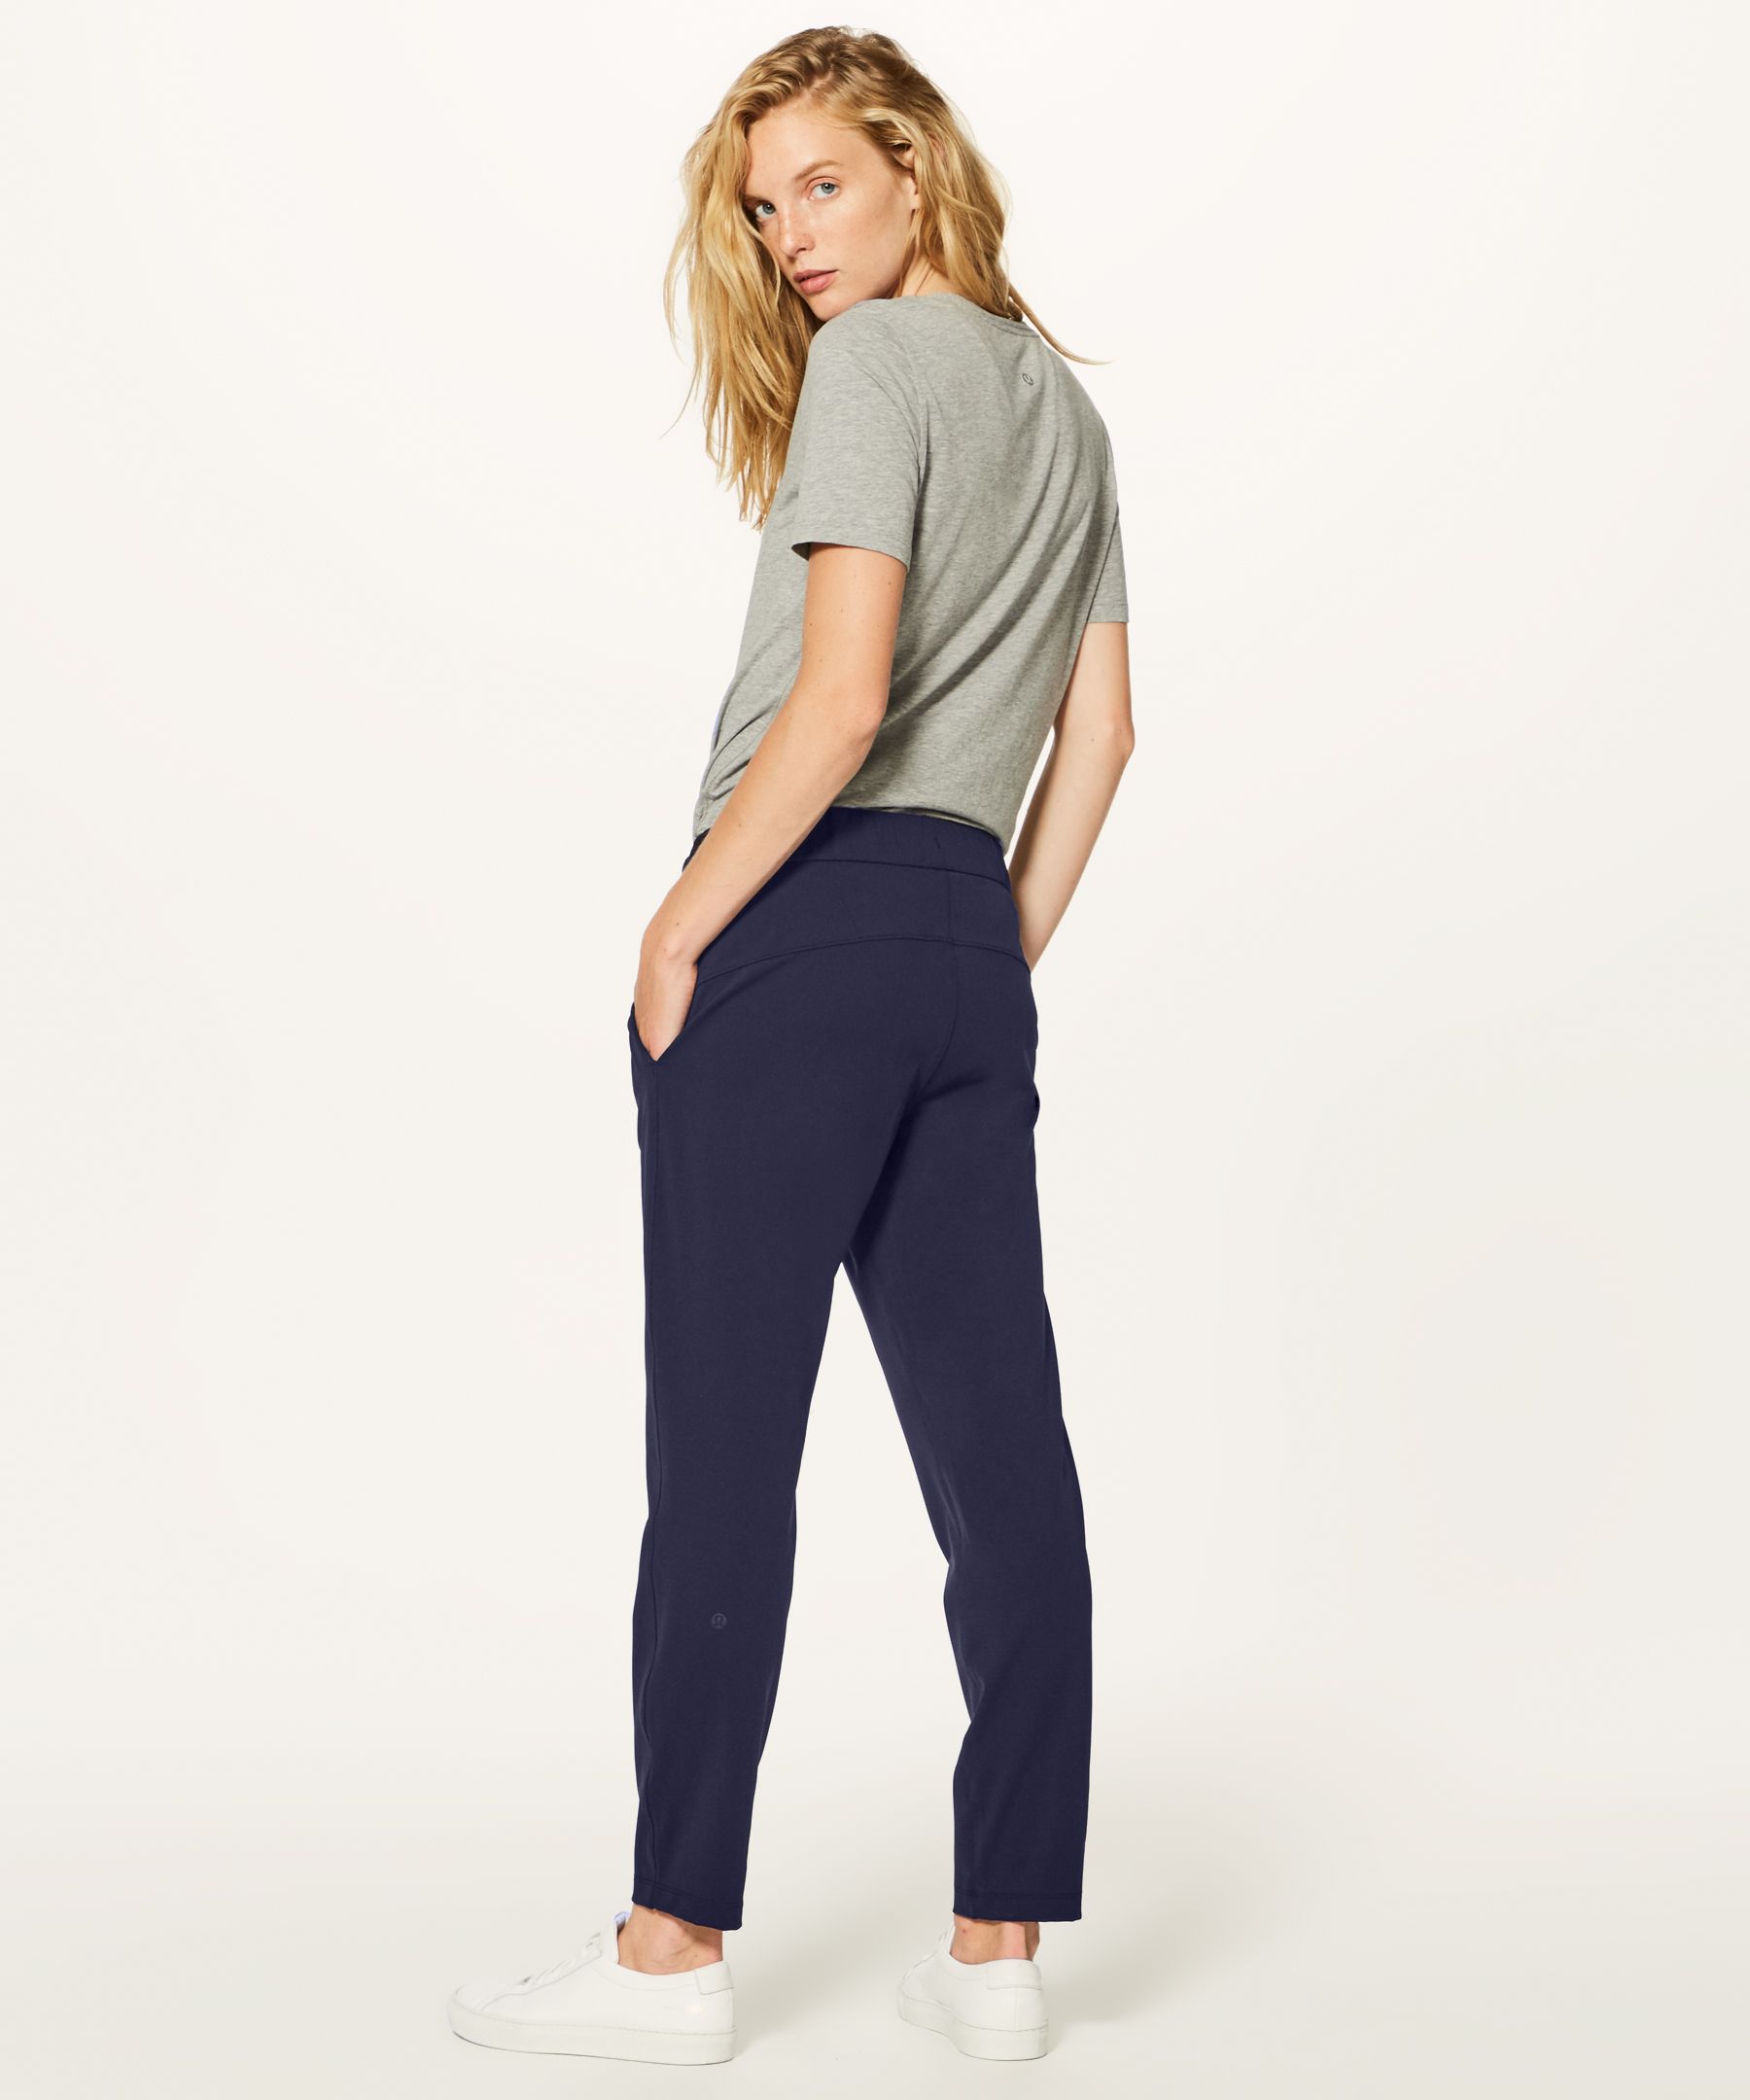 My Most-Used LLL Item: On the Fly 7/8 pants (12, shirt not LLL) :  r/lululemon